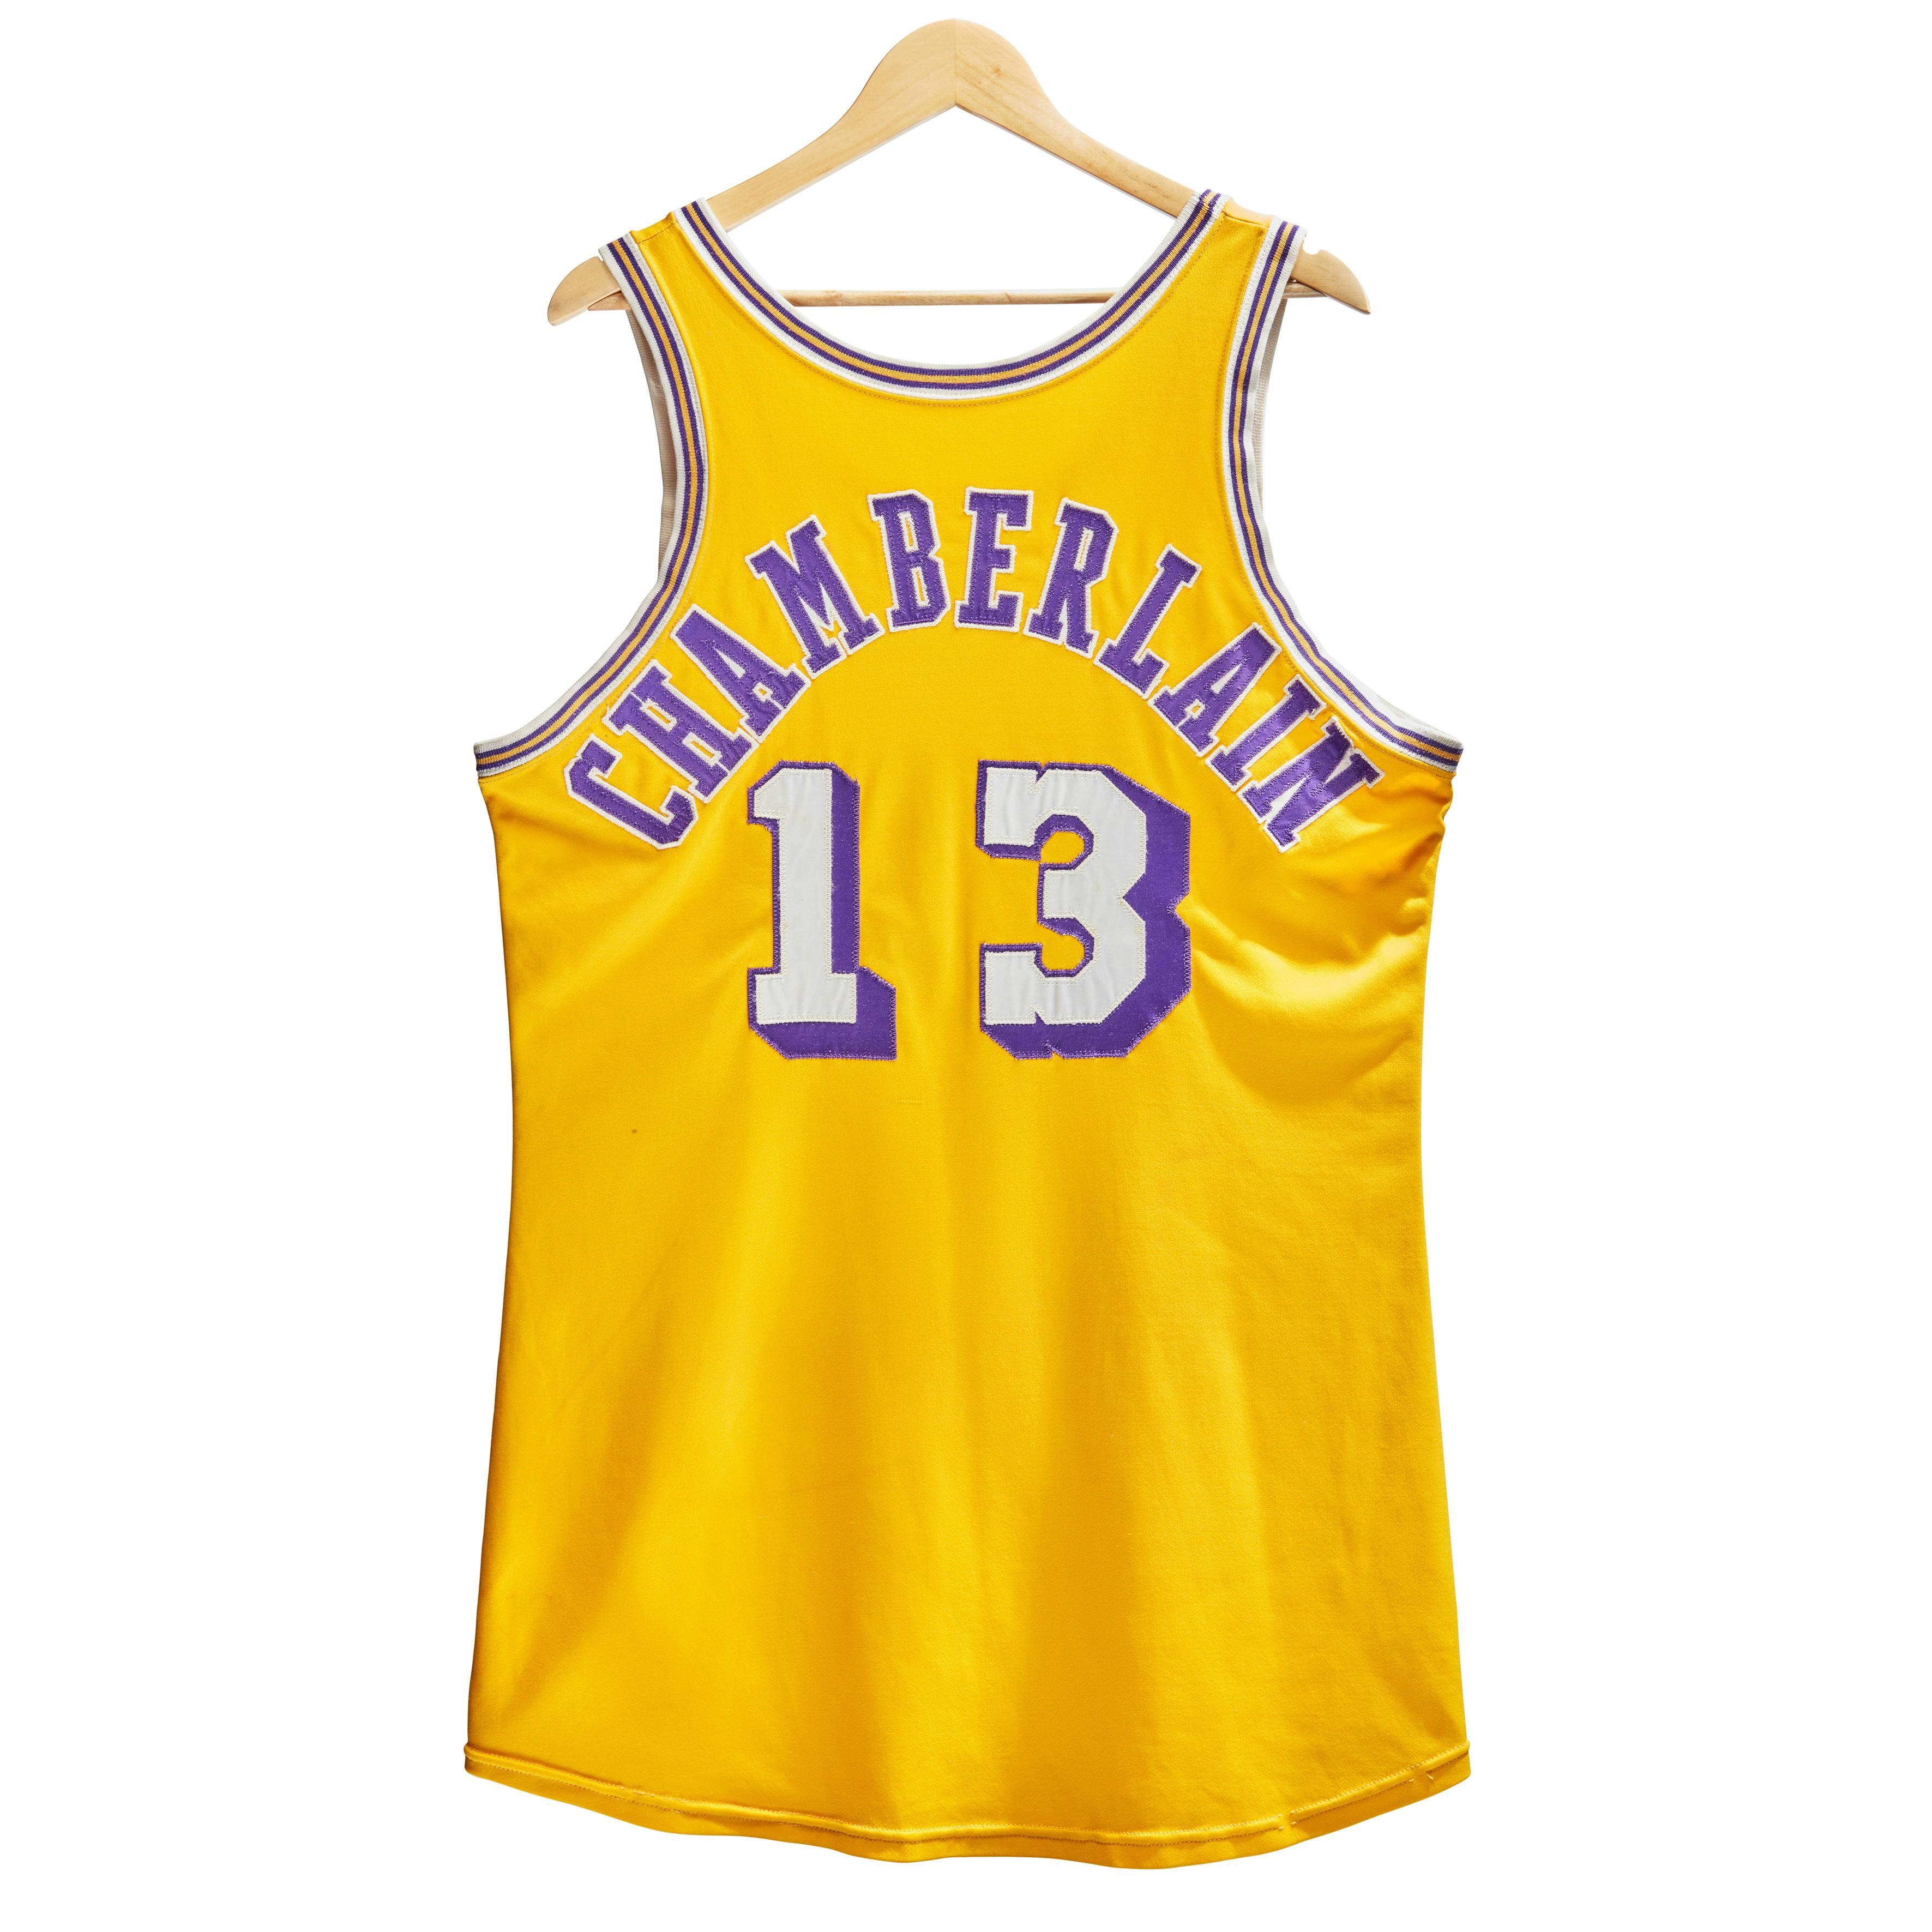 Wilt's 1972 NBA Finals jersey sold for $4.9 MILLION 😳 The third-most  expensive NBA jersey ever sold at auction!